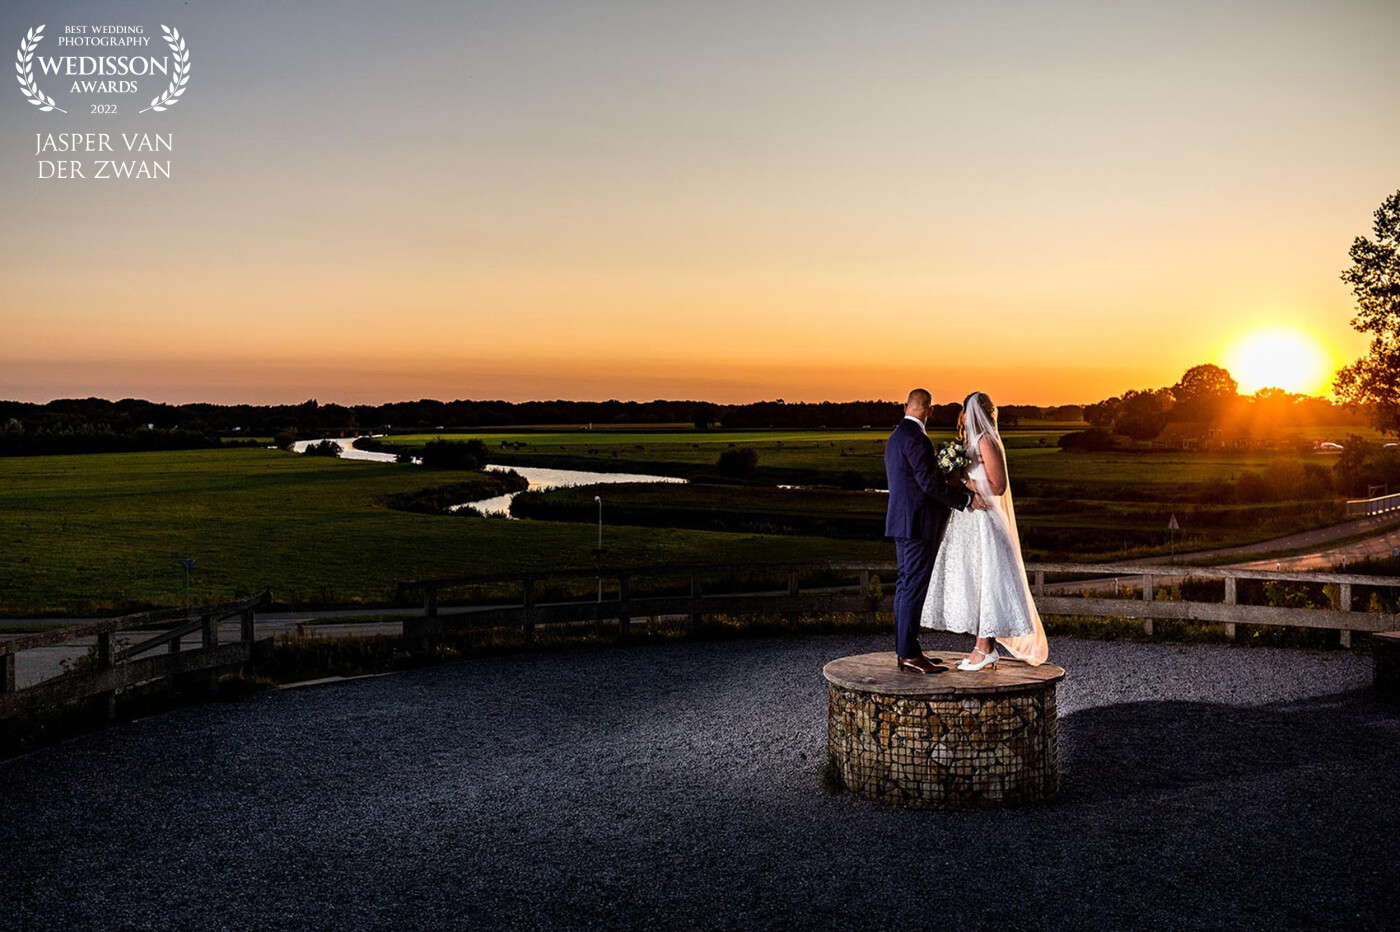 This photo was taken at the Distelberg near Diffelen near the wedding location.<br />
With the river de Vecht, with Overijssel landscape and the sunset in the background.<br />
This makes for me personally the complete wedding photo combined with nature.